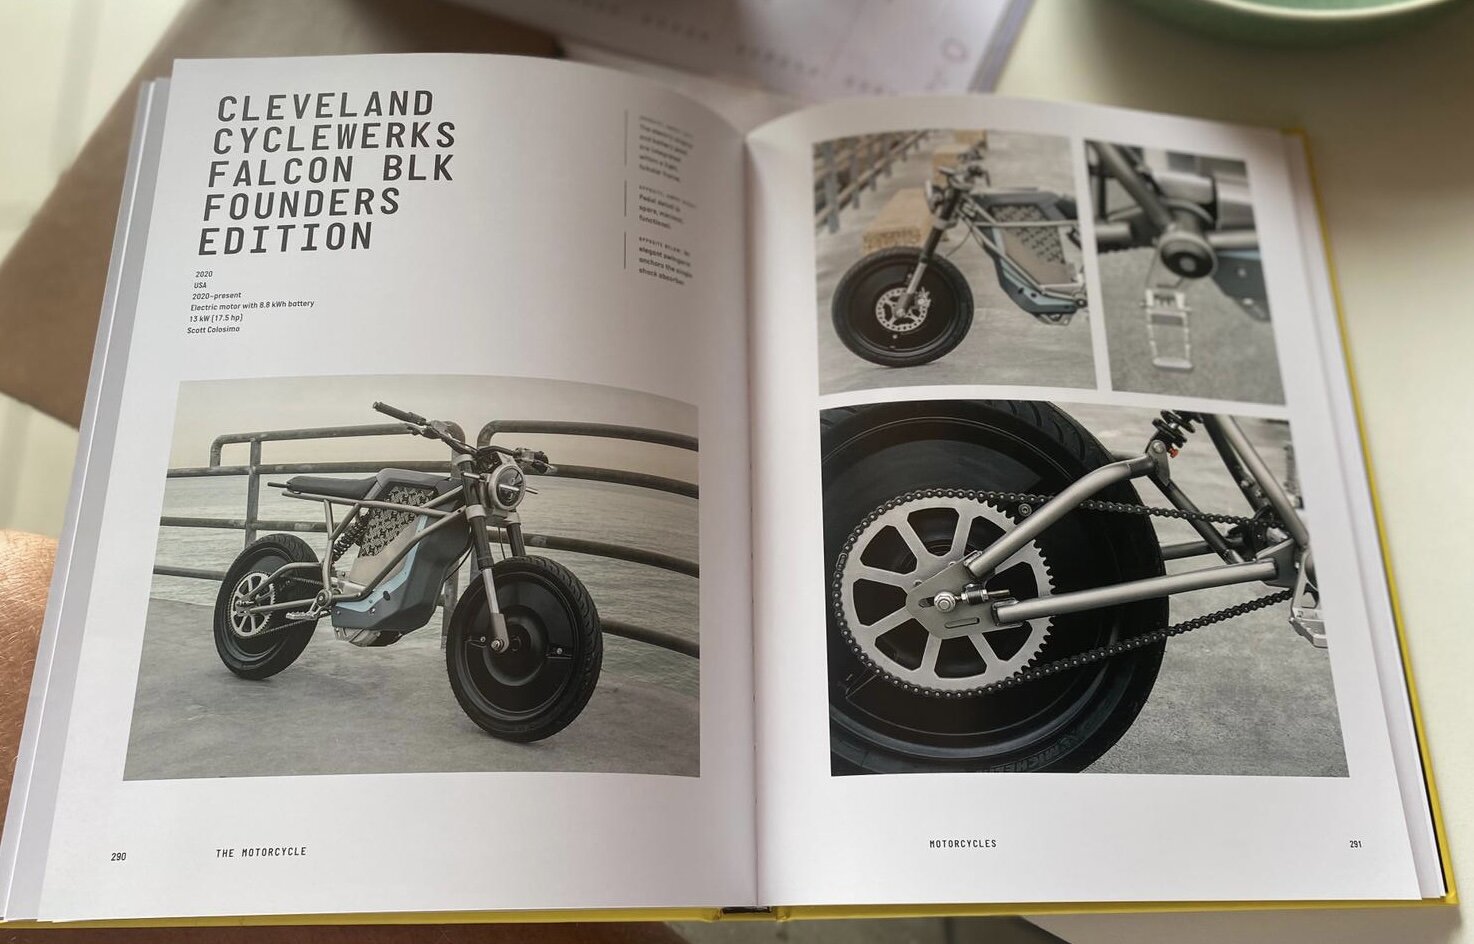 Thank you Quagoma, LAND featured in “The Motorcycle”